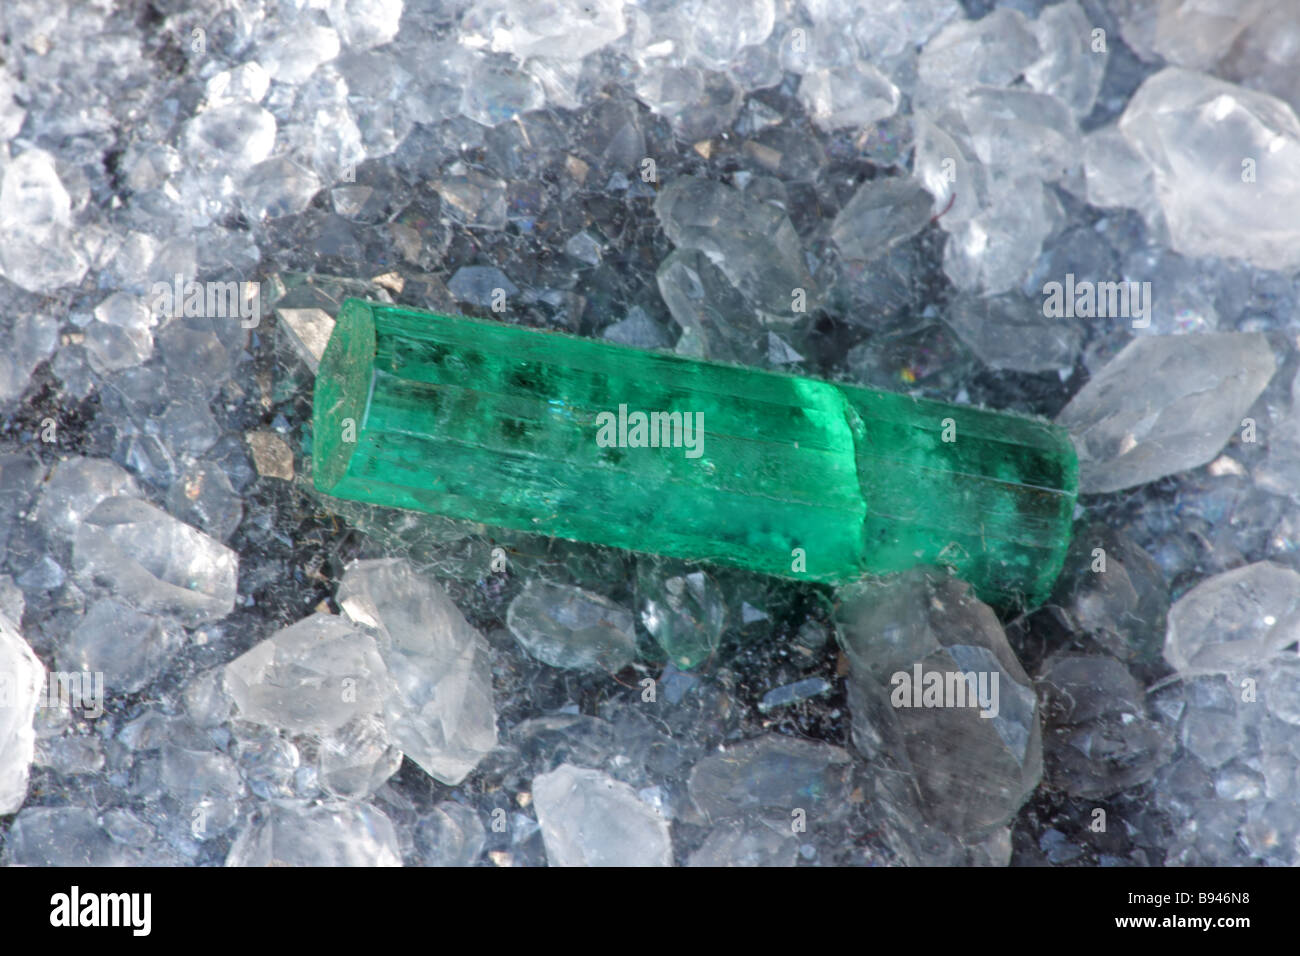 Emerald - Mined in Colombia - Green variety of the mineral beryl - Green color from chromium during crystalization Stock Photo